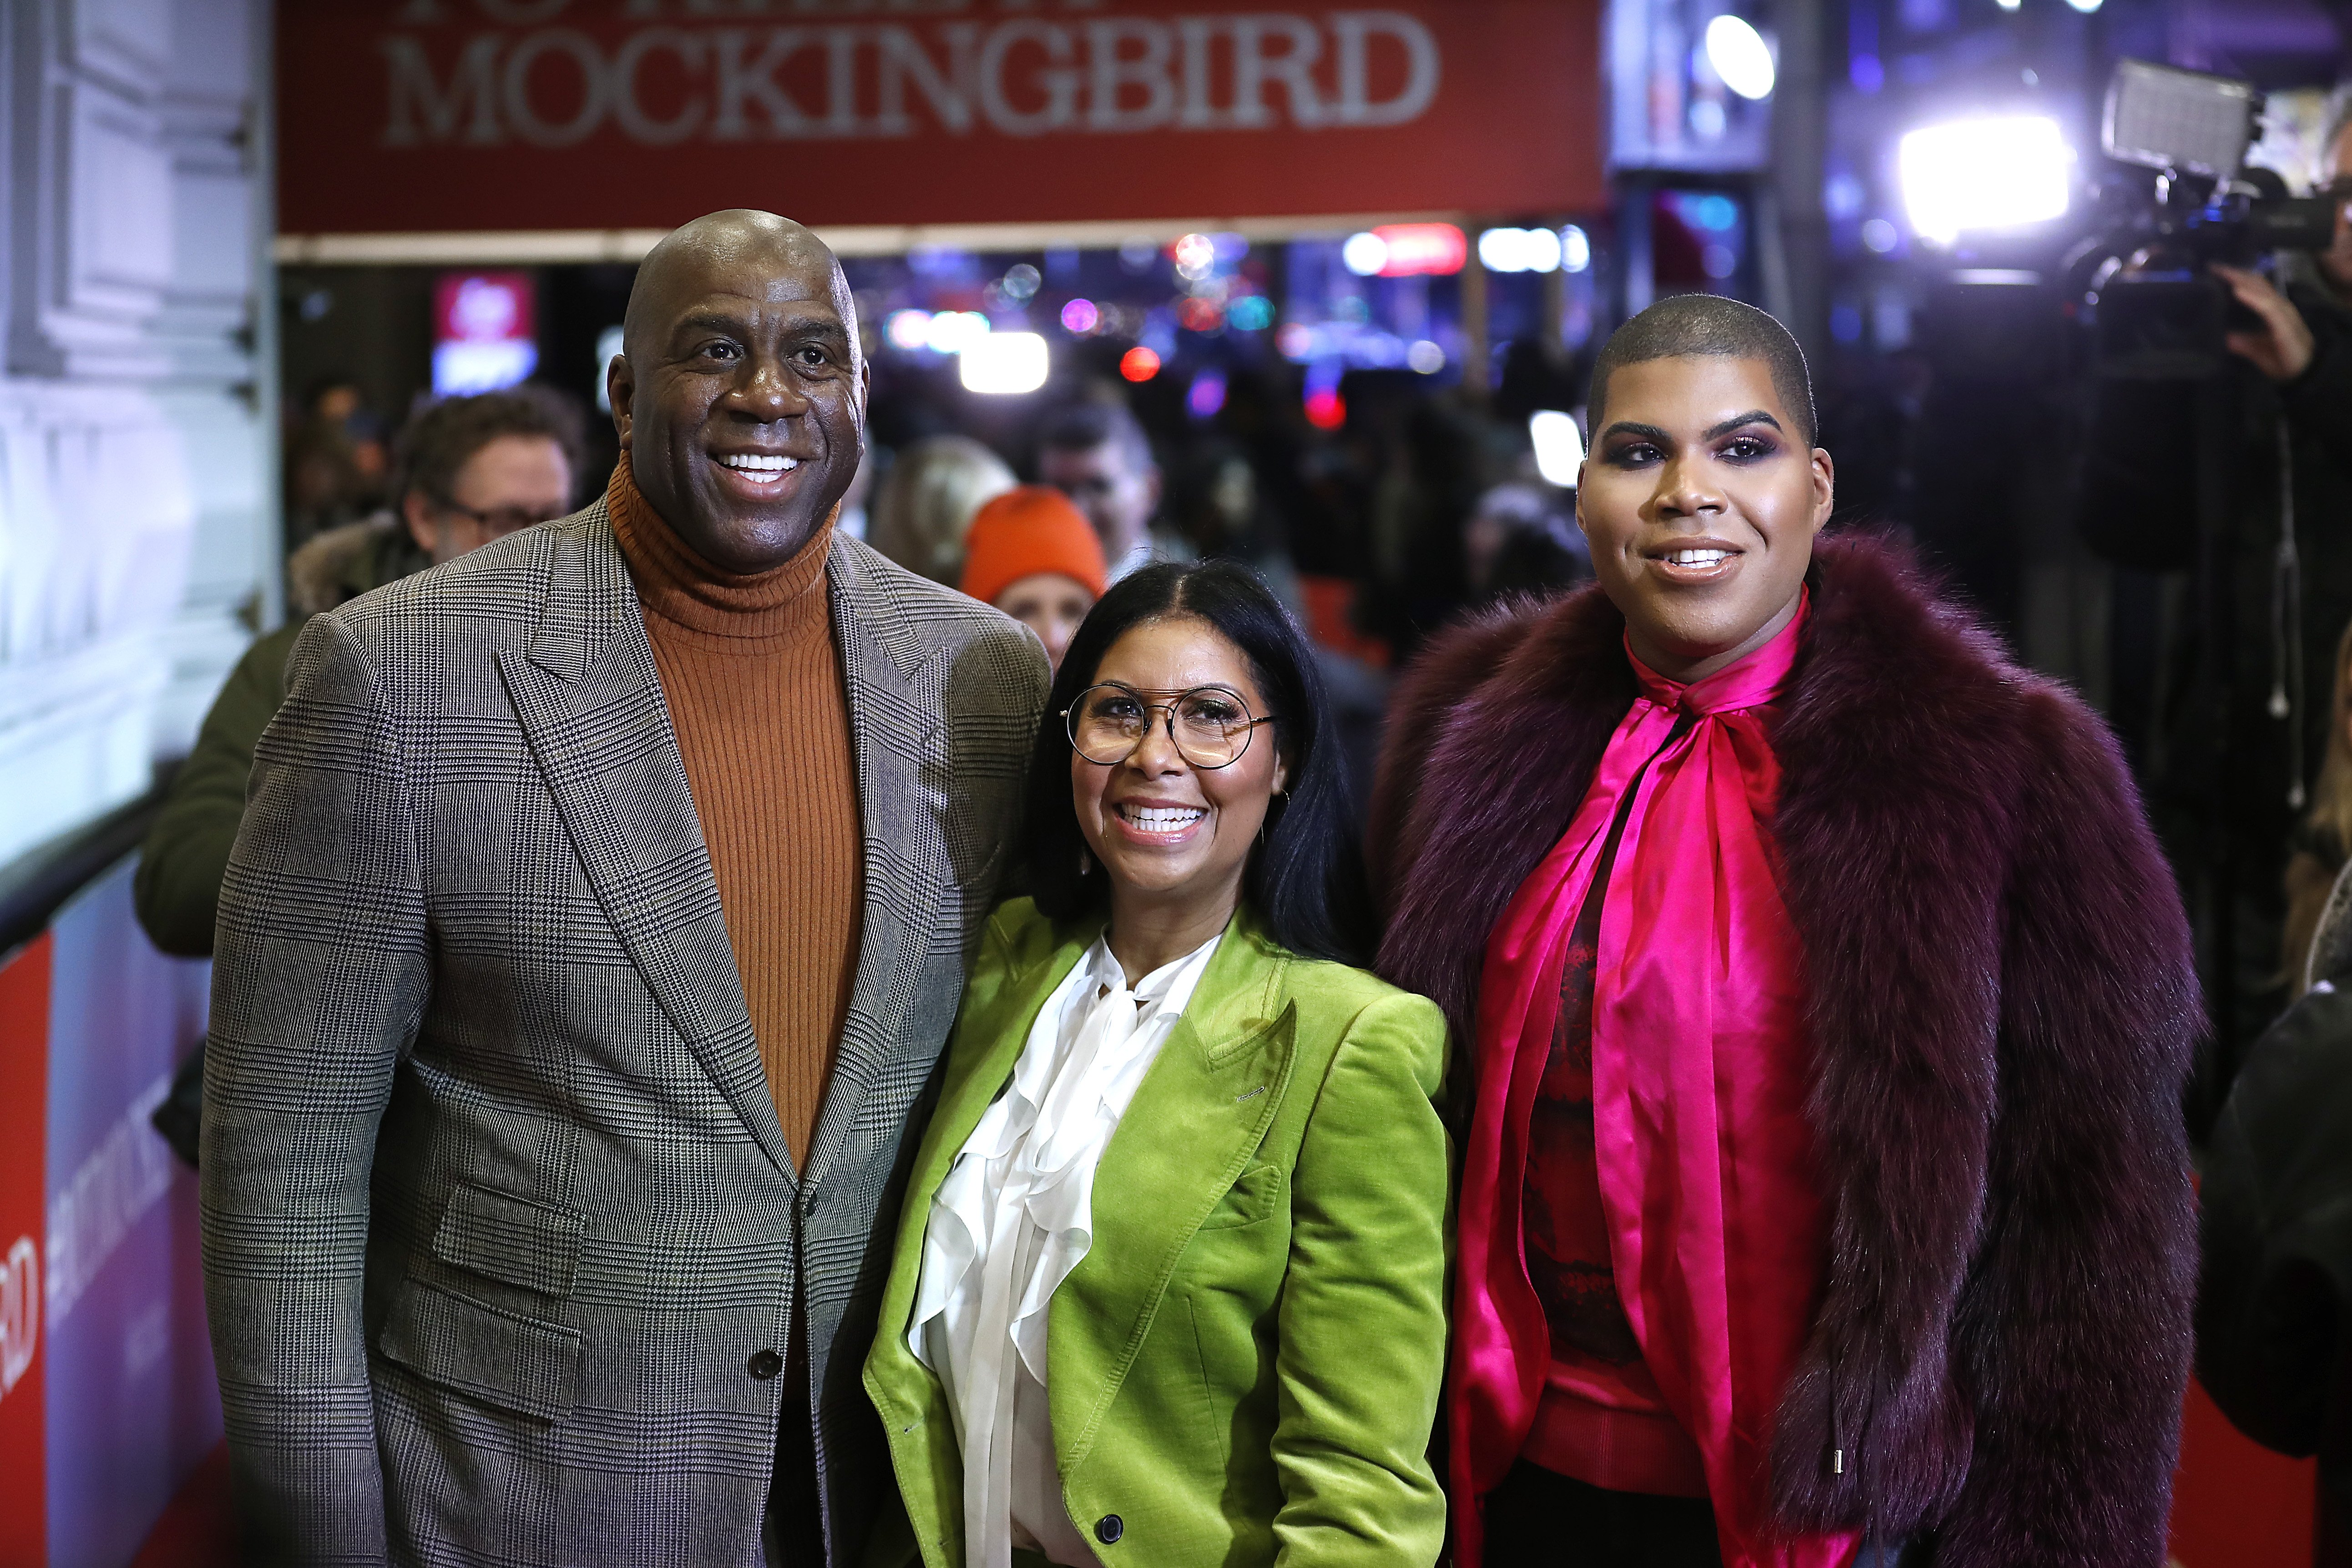 Magic Johnson, Cookie Johnson and EJ Johnson attend "To Kill A Mockingbird" Broadway Opening Night at Shubert Theatre on December 13, 2018. | Photo: Getty Images